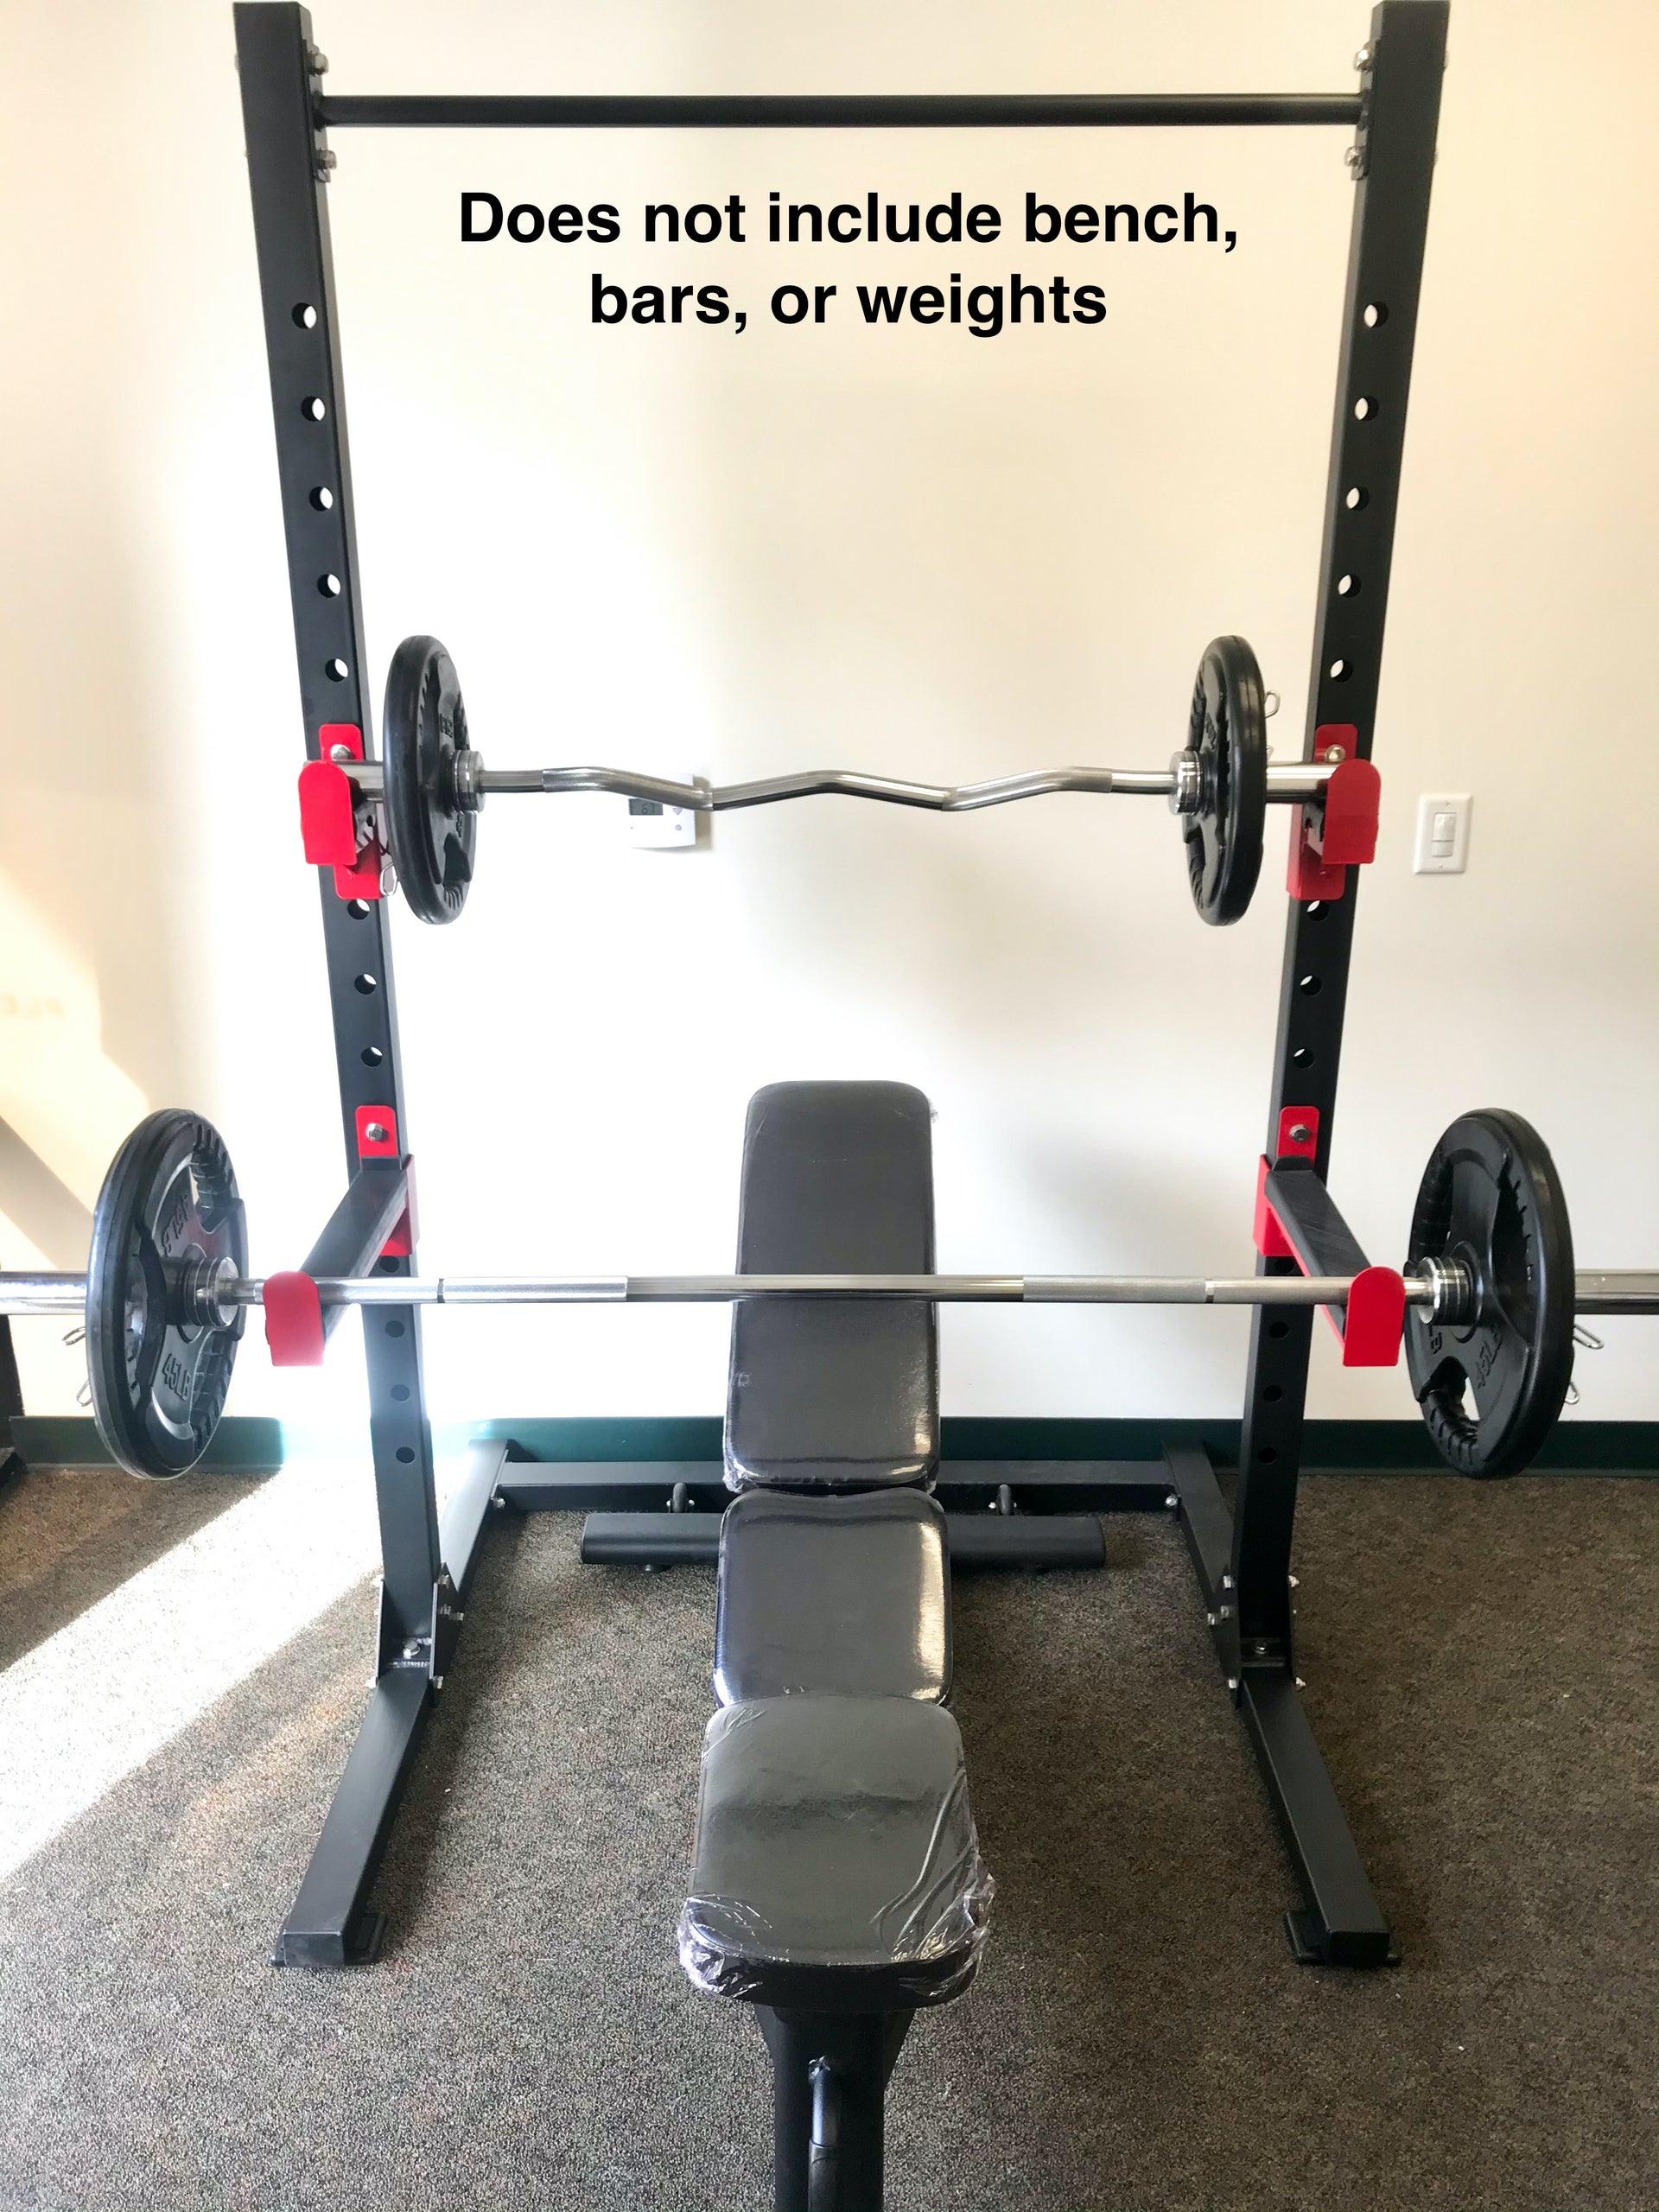 Squat rack with bench and bars